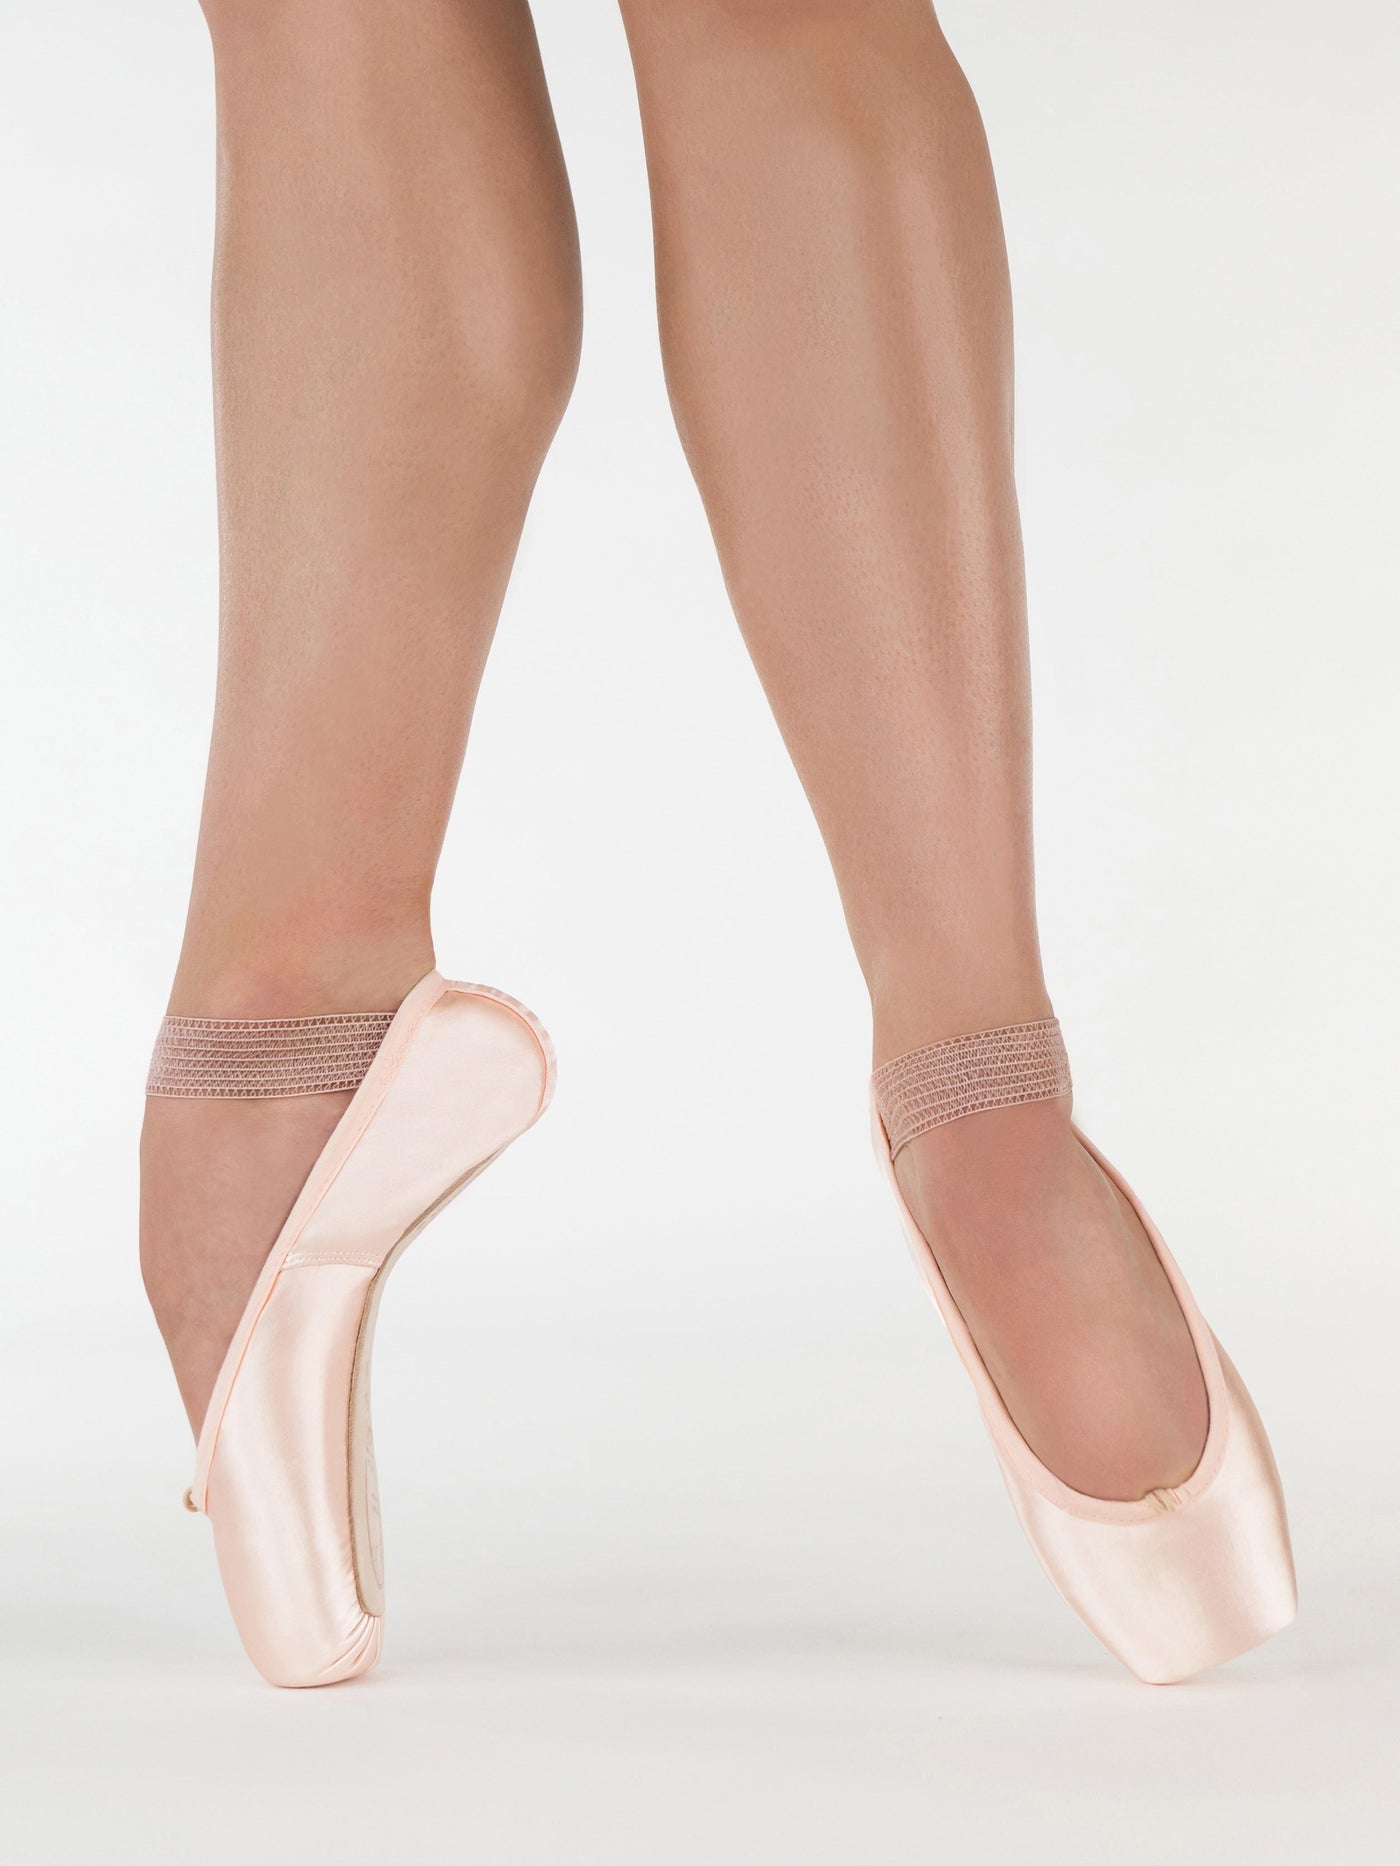 Suffolk Silhouette Pointe Shoes